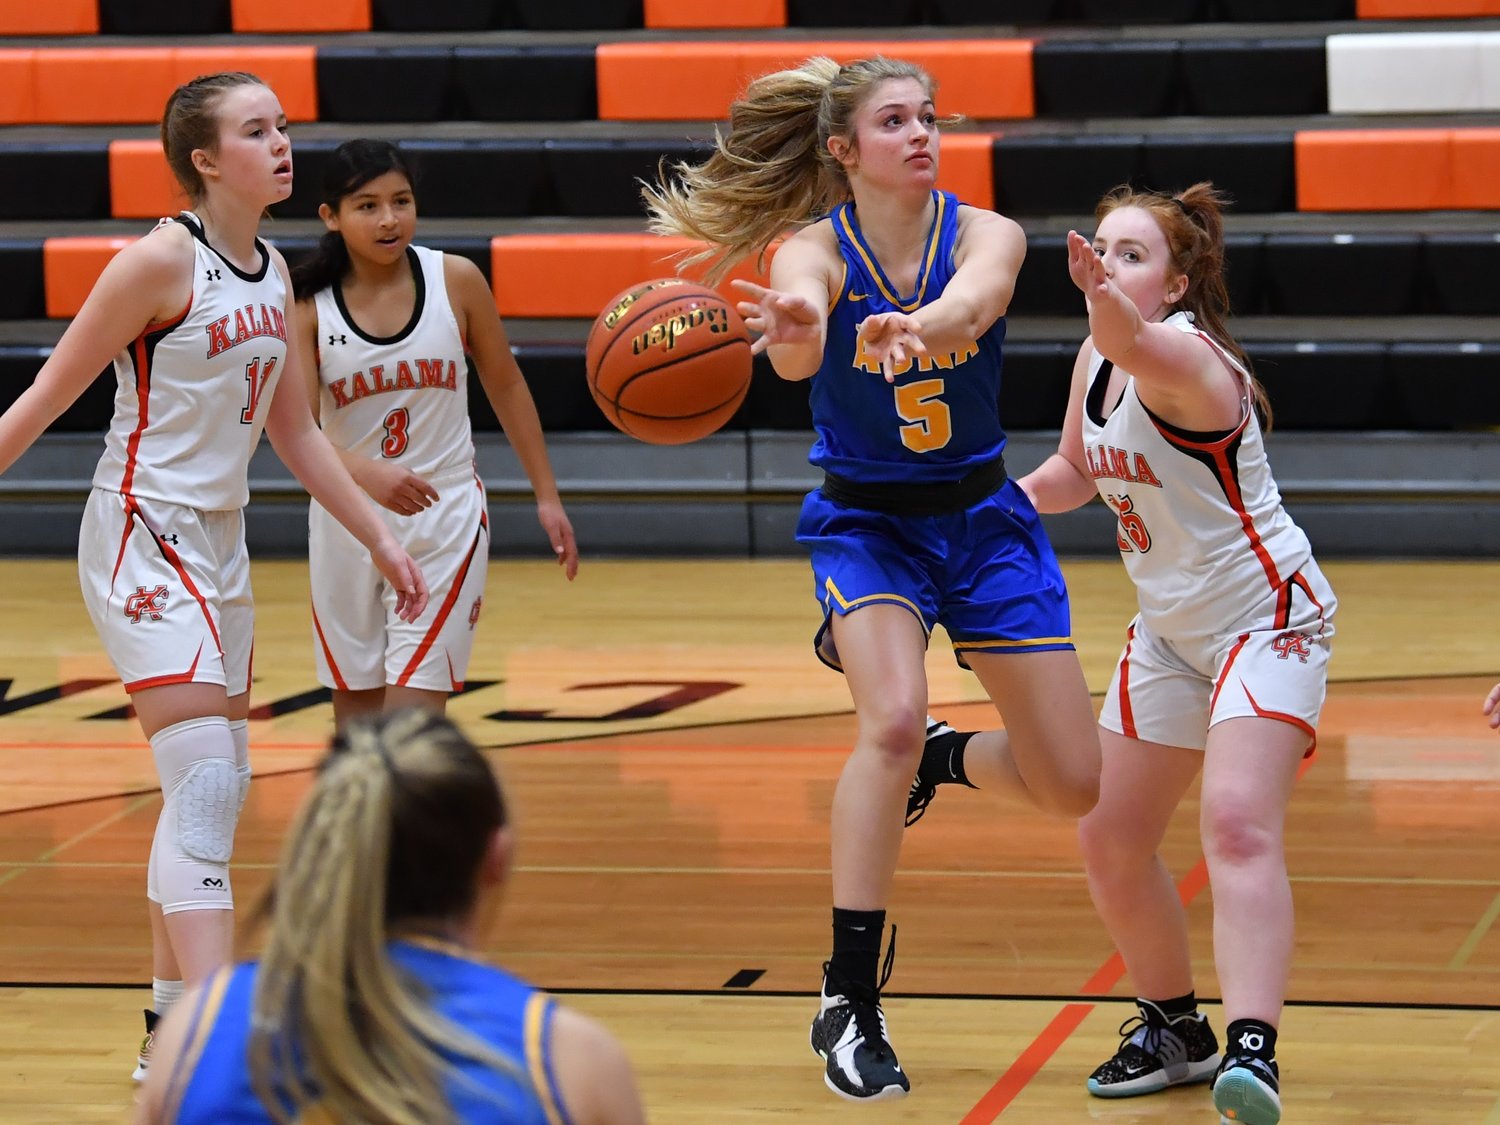 Adna guard Kaylin Todd throws a no-look pass to a teammate in the corner against Kalama Jan. 8.